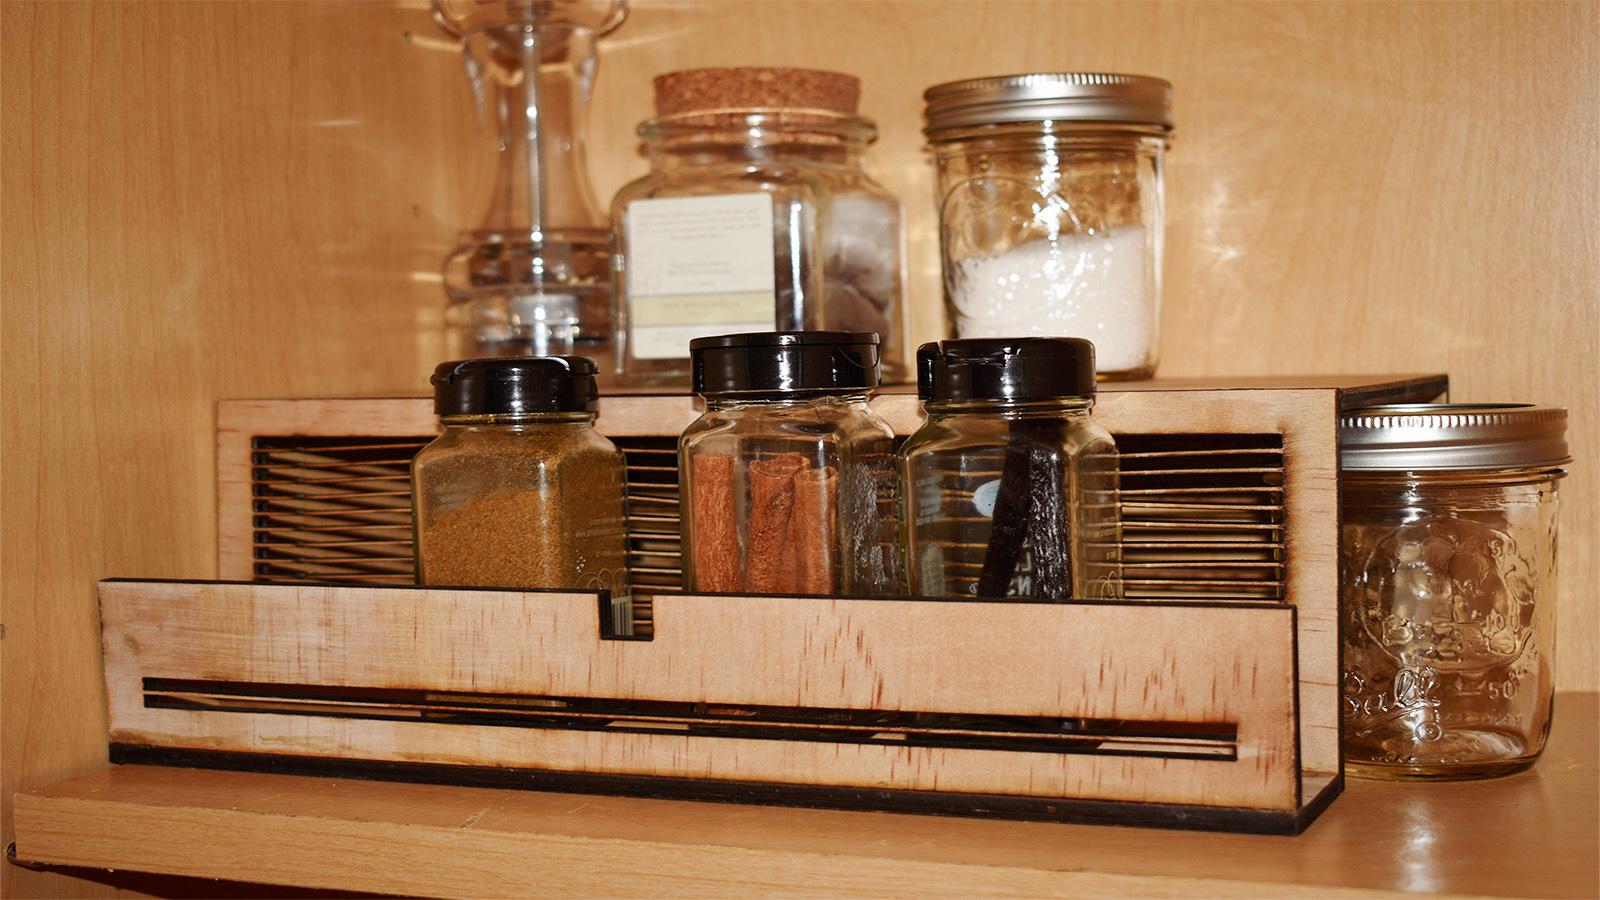 hhandcrafted shelf organizer shown with jars on it in a cabinet